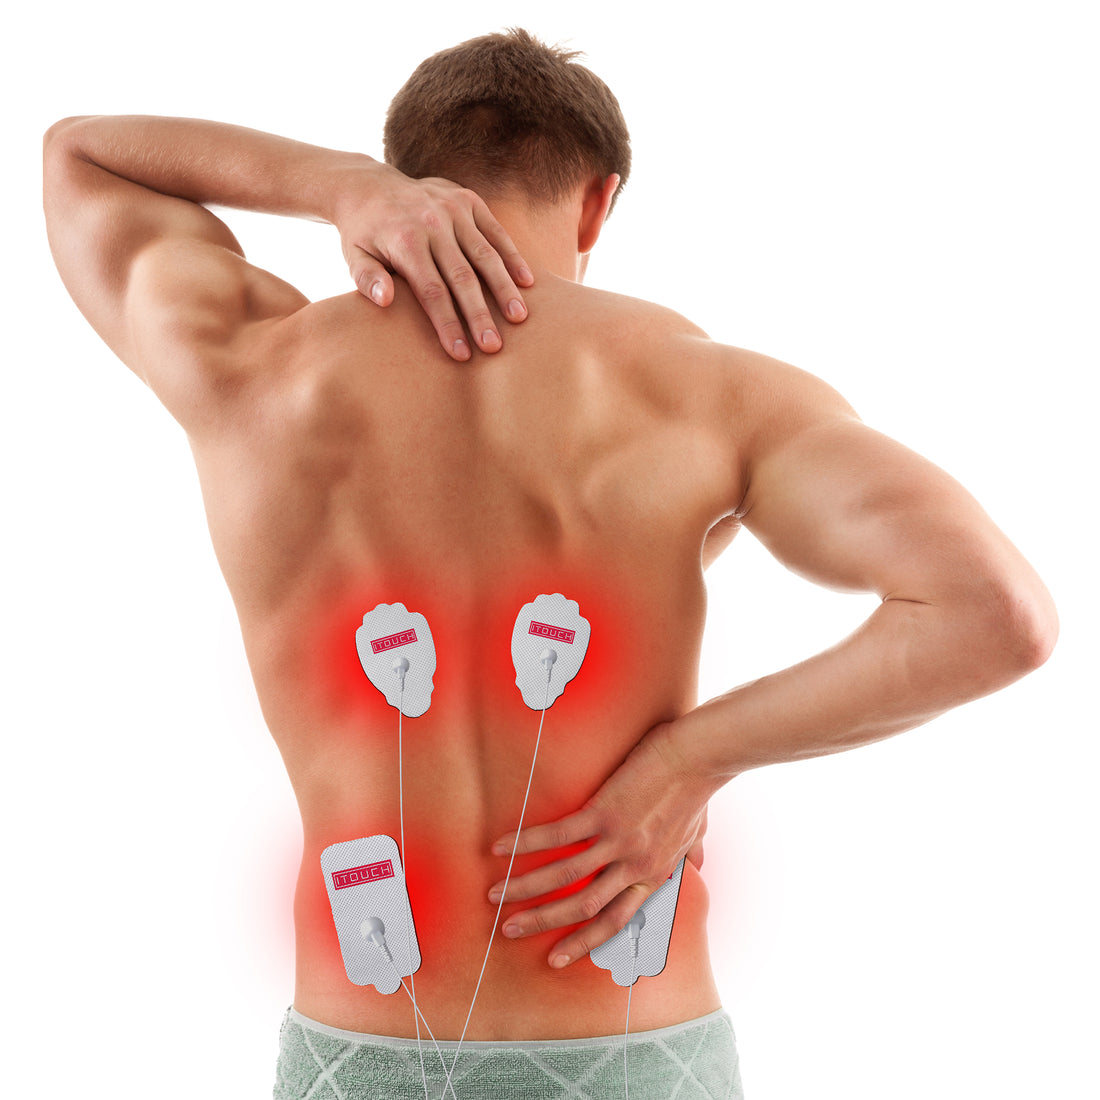 How TENS Unit Help With Back Pain